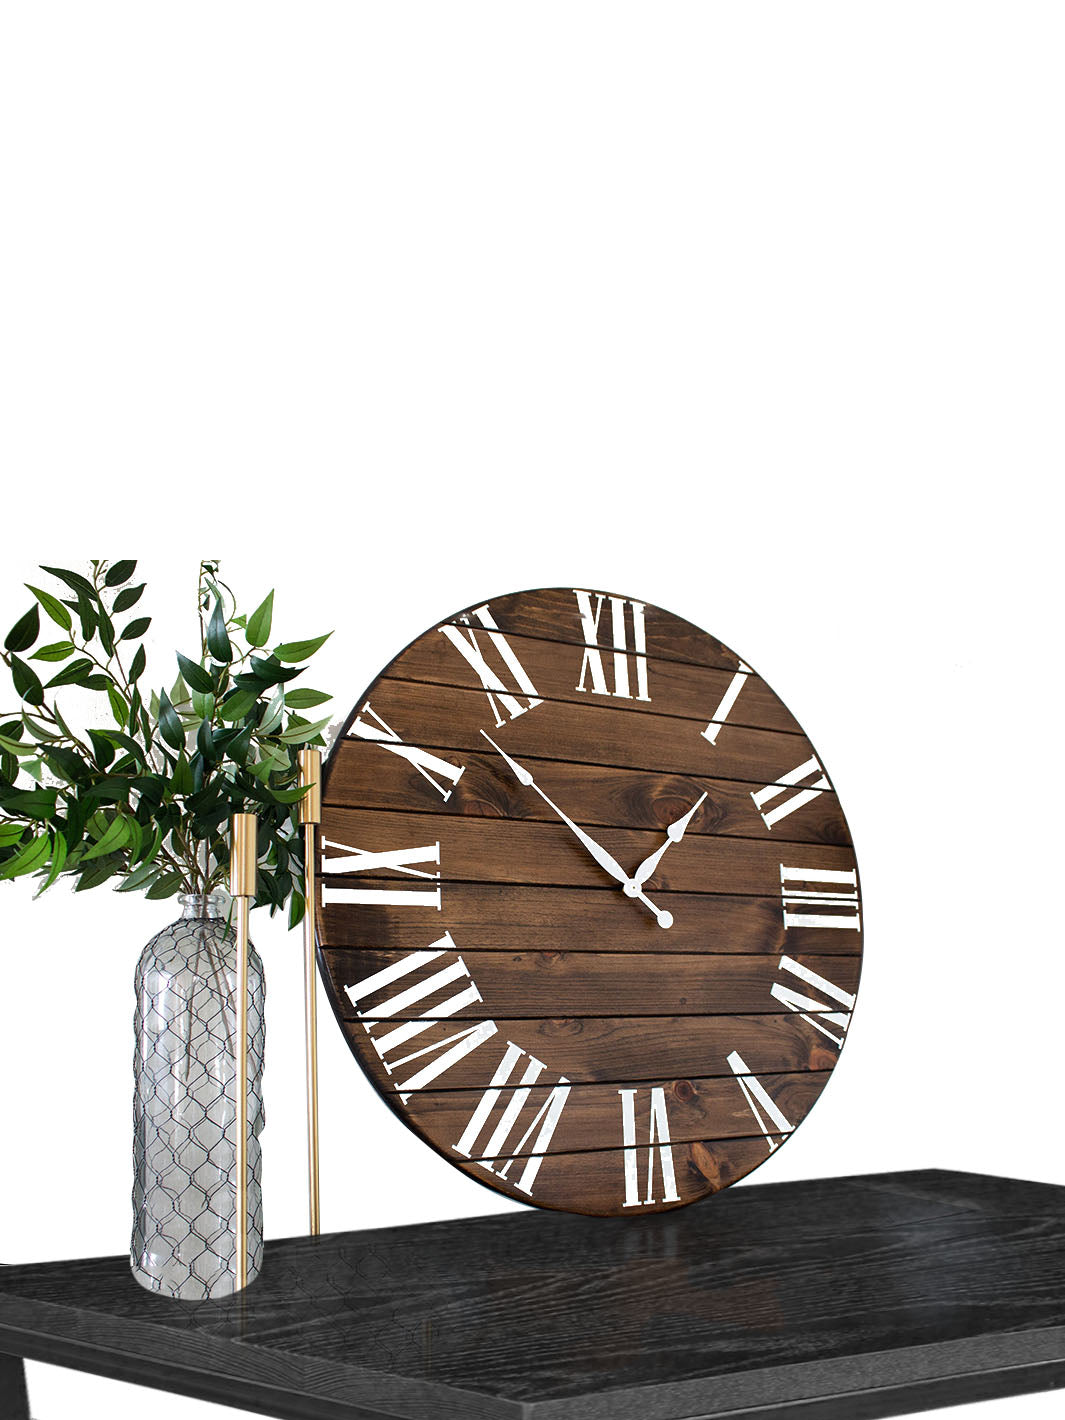 Dark Stained Large Farmhouse Wall Clock with White Roman Numerals Earthly Comfort Clocks 596